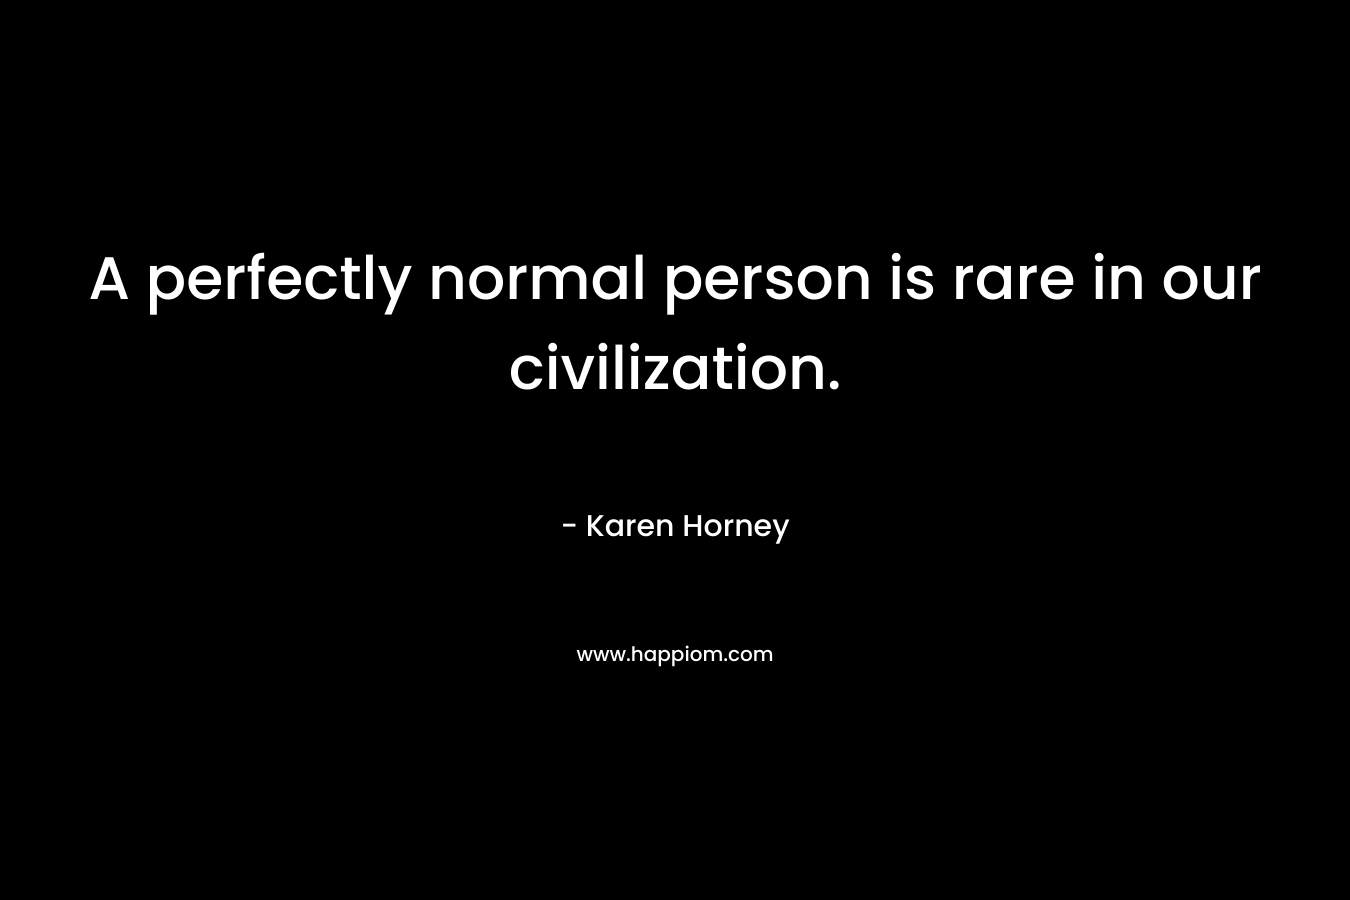 A perfectly normal person is rare in our civilization.